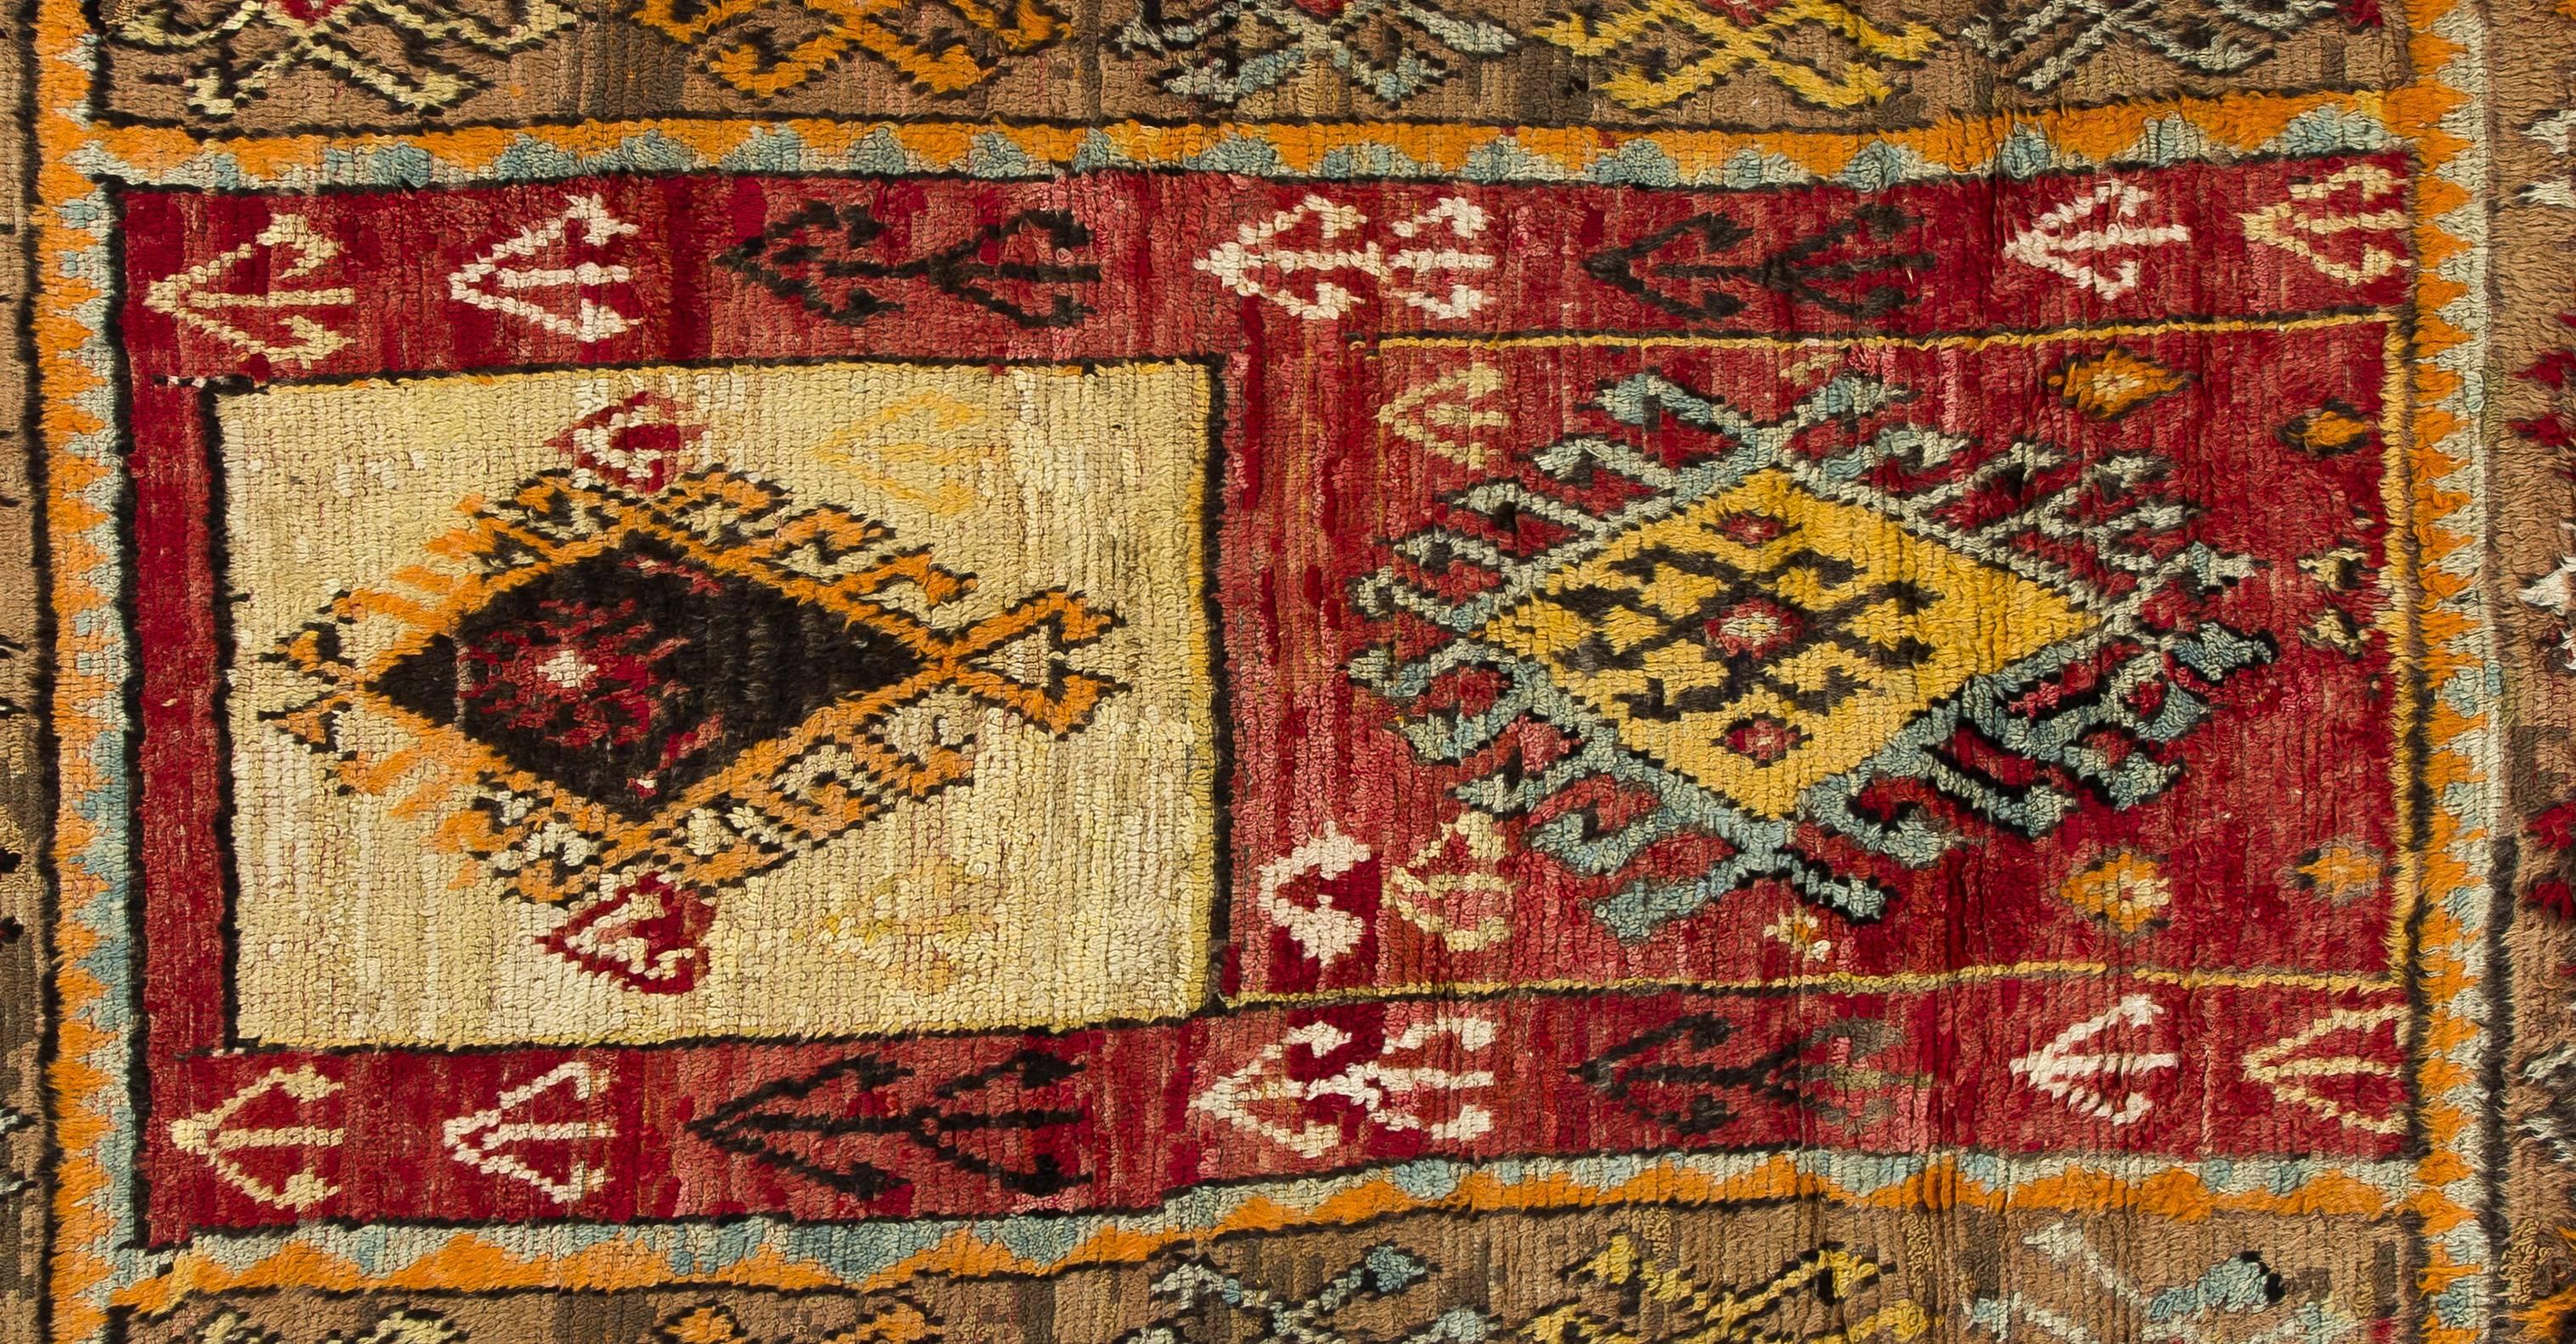 An archaic and unique antique hand-knotted rug produced by the nomads in Central Anatolia by the turn of the century for their daily use rather than re-sale purpose. Lustrous wool pile on cotton foundation, well preserved original condition.